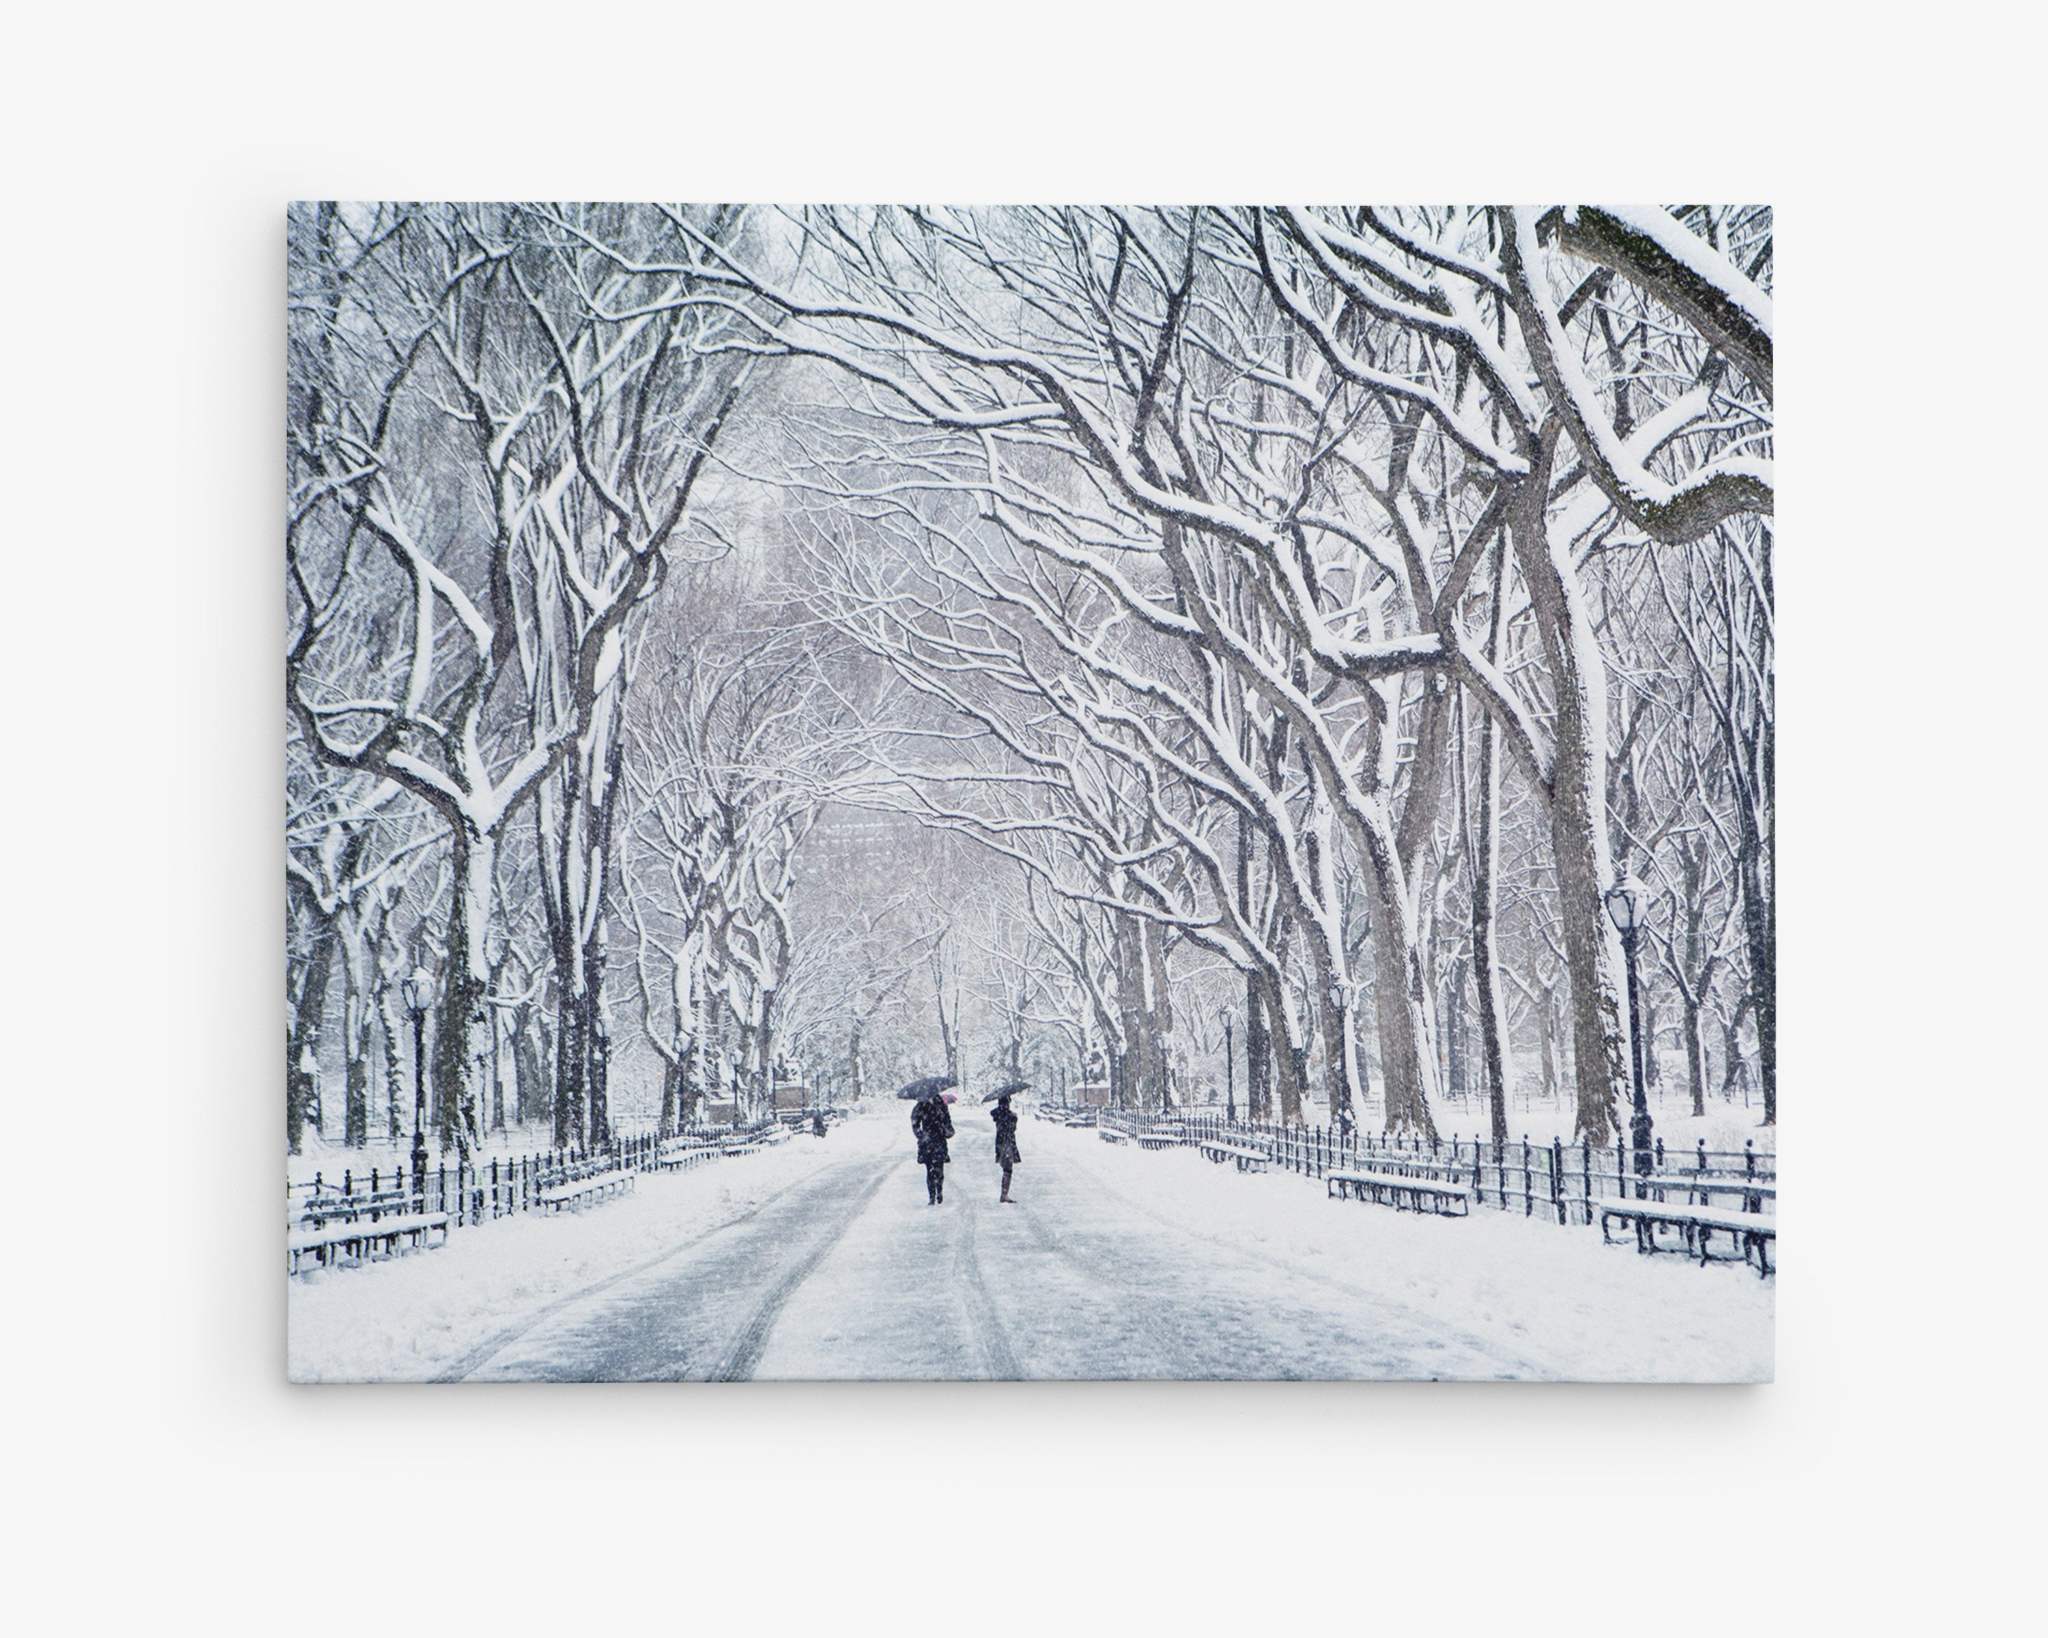 A snowy winter scene in a park with bare trees lining both sides of a wide path. Two people, dressed in winter clothing, walk down the path, creating footprints in the snow. The sky is overcast, and the entire landscape is covered in a thick layer of snow on Offley Green&#39;s New York Central Park Wall Art, &#39;The Mall In Winter&#39;.